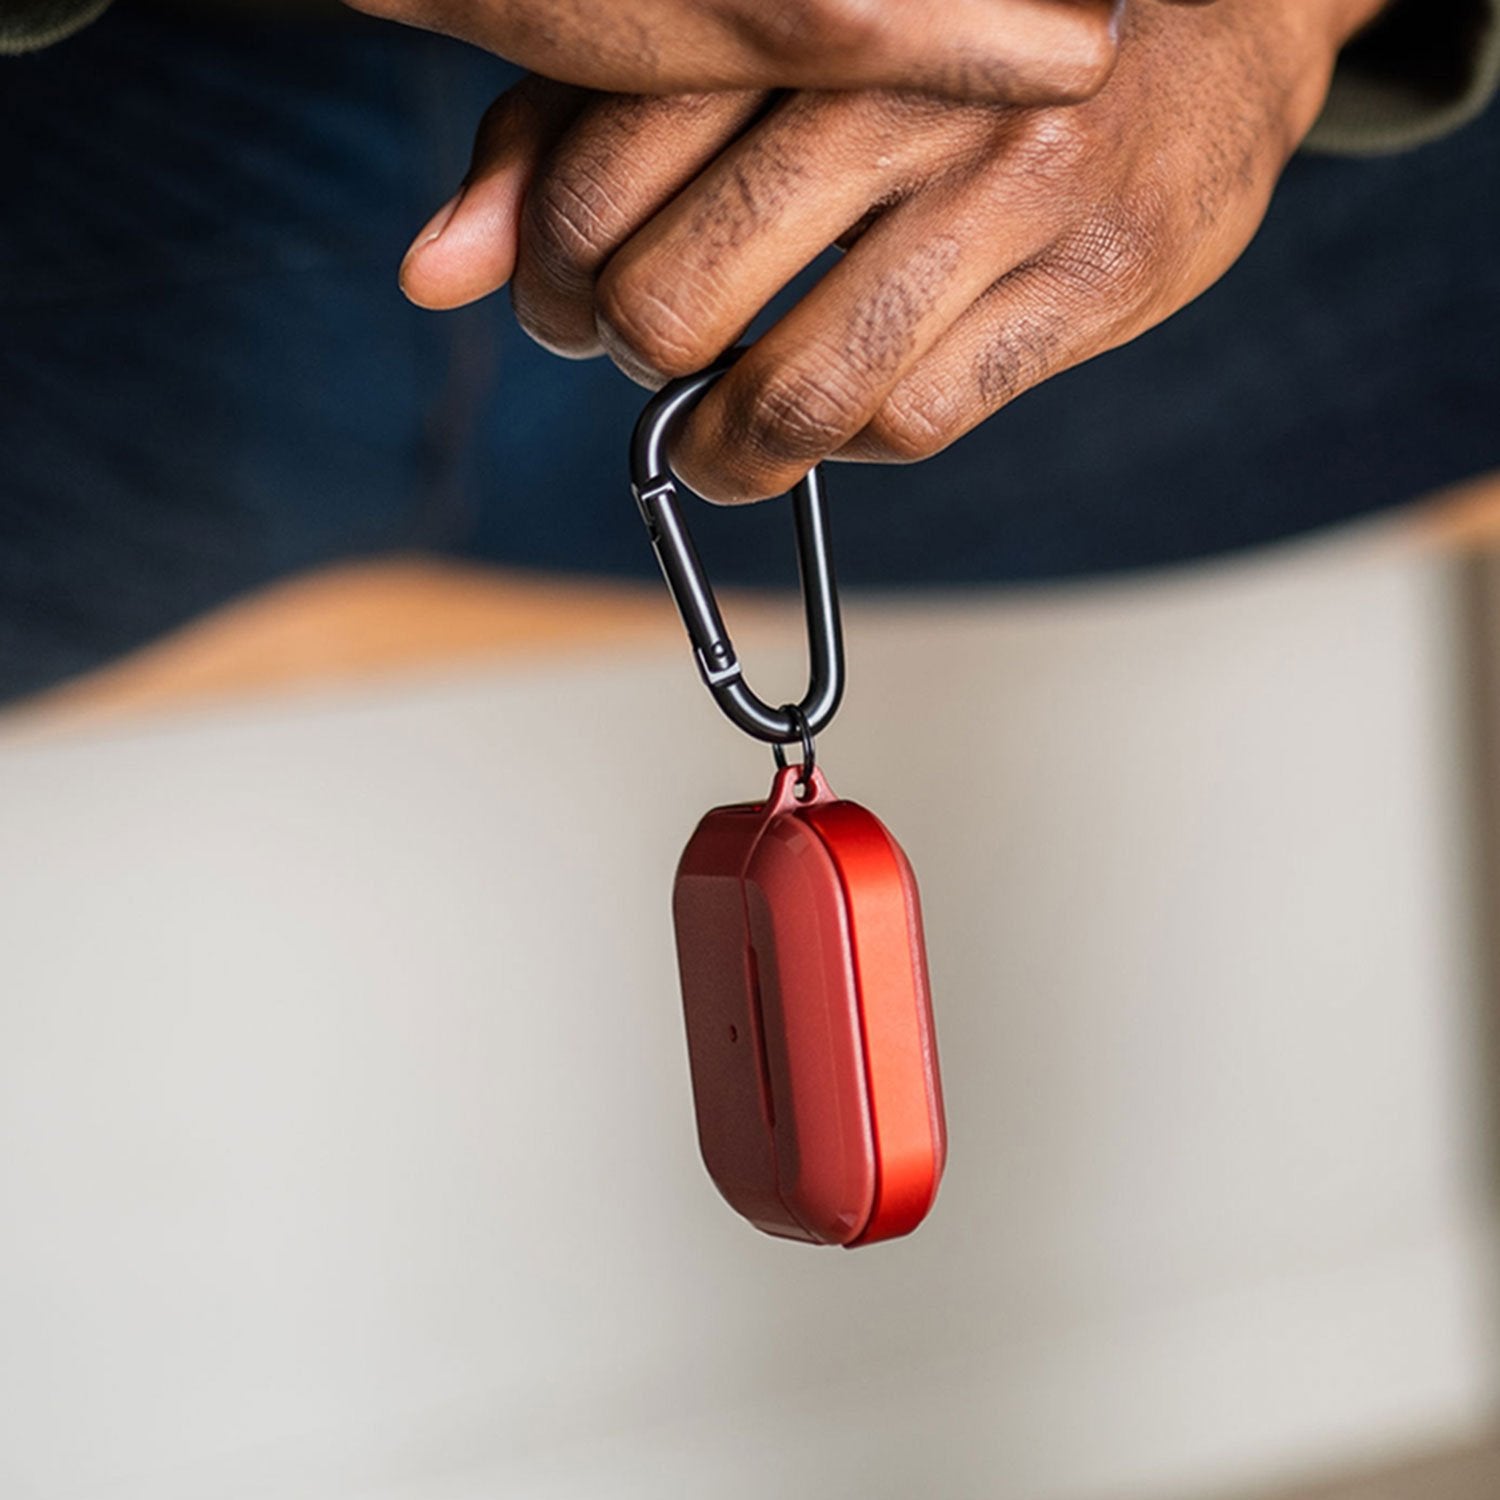 Raptic Trek Red on Apple AirPods Pro showing the easy to slip on and off top, bottom and detachable carabiner.